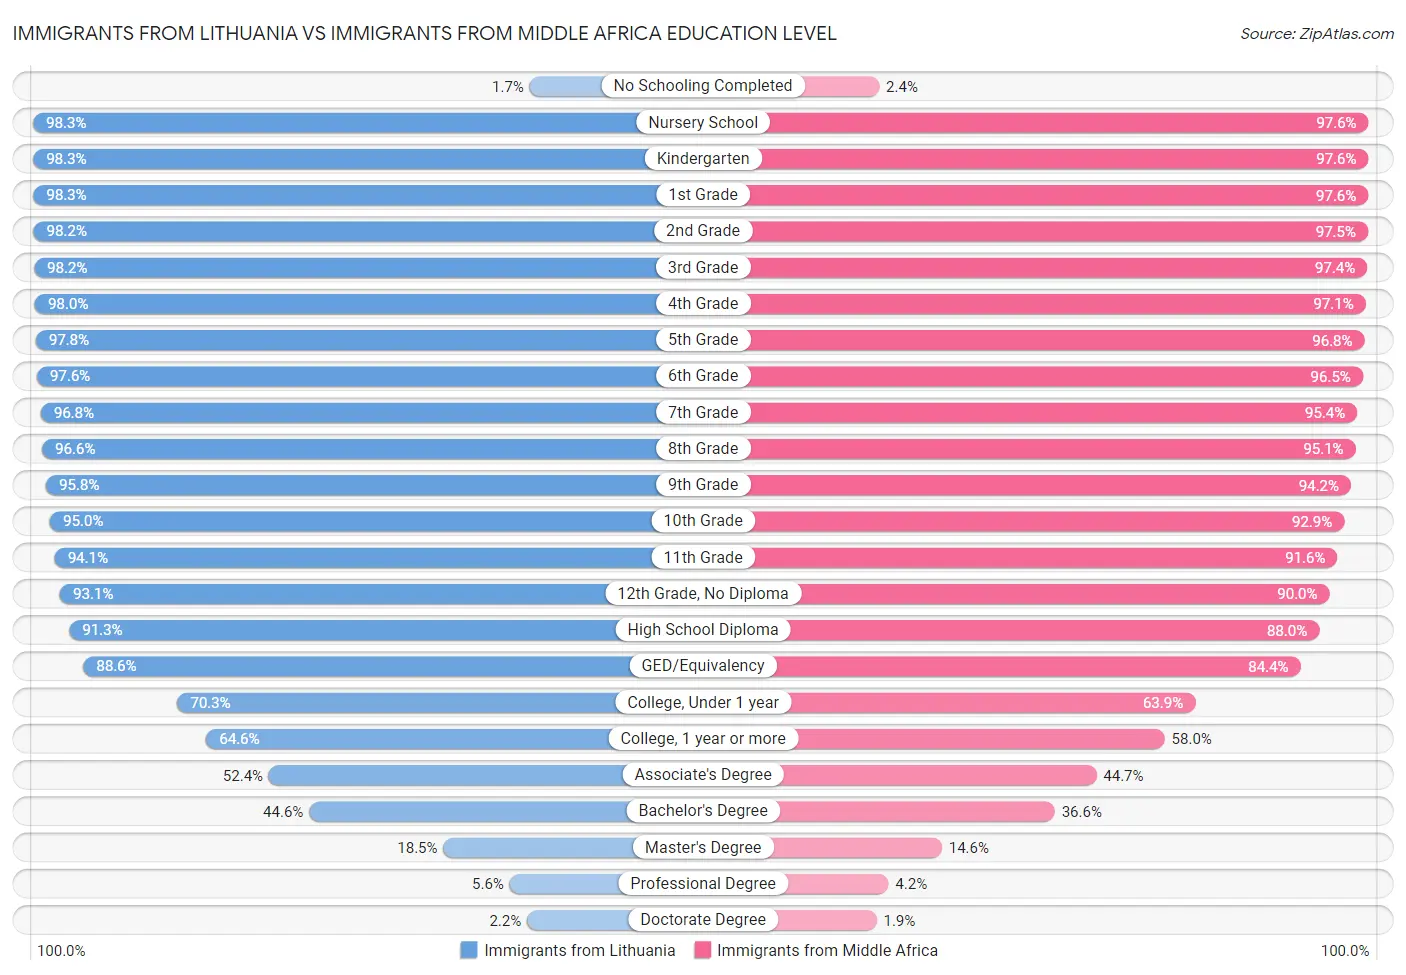 Immigrants from Lithuania vs Immigrants from Middle Africa Education Level